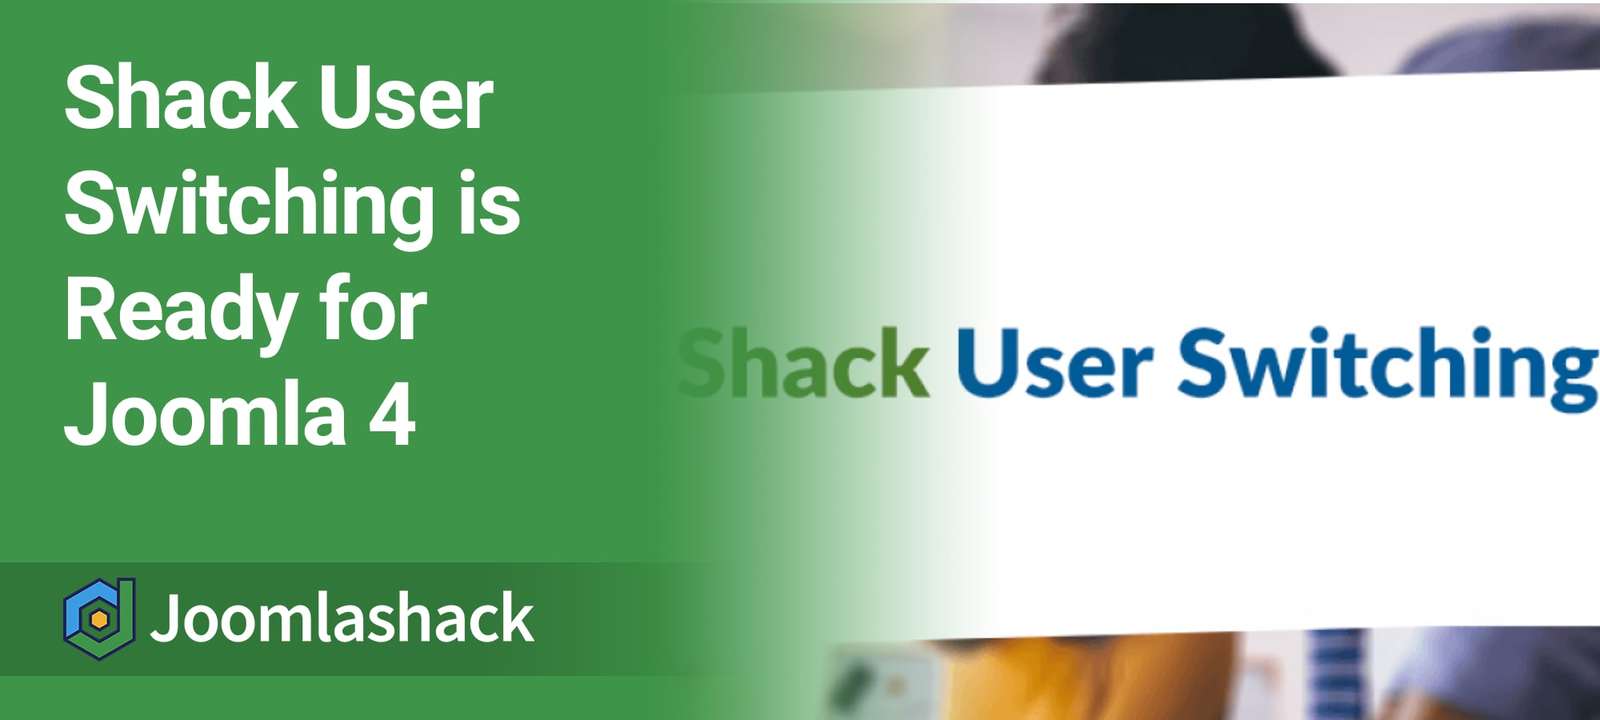 Shack User Switching is Ready for Joomla 4